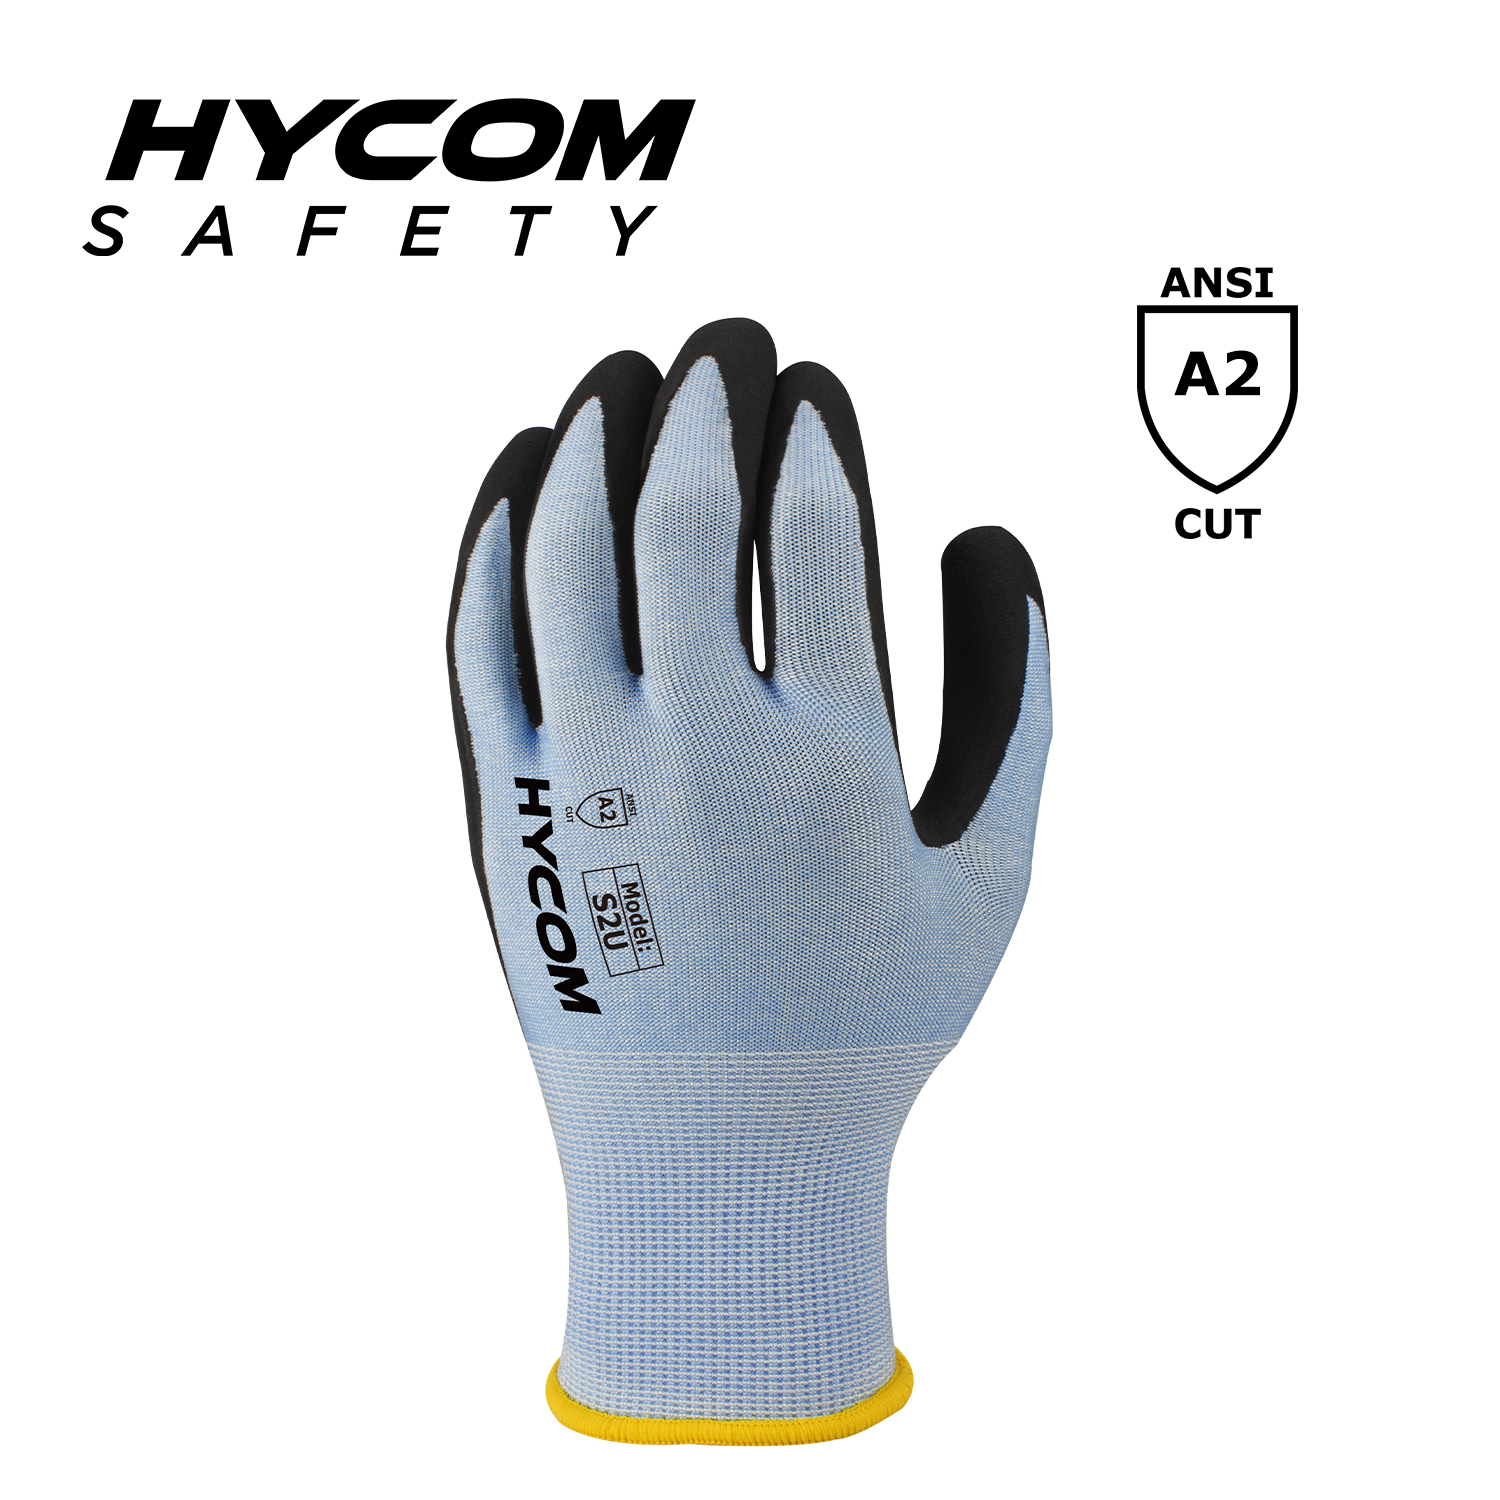 HYCOM 18G ANSI 2 Cut Resistant Glove with Palm Nitrile Coating Super Thiner Work Gloves